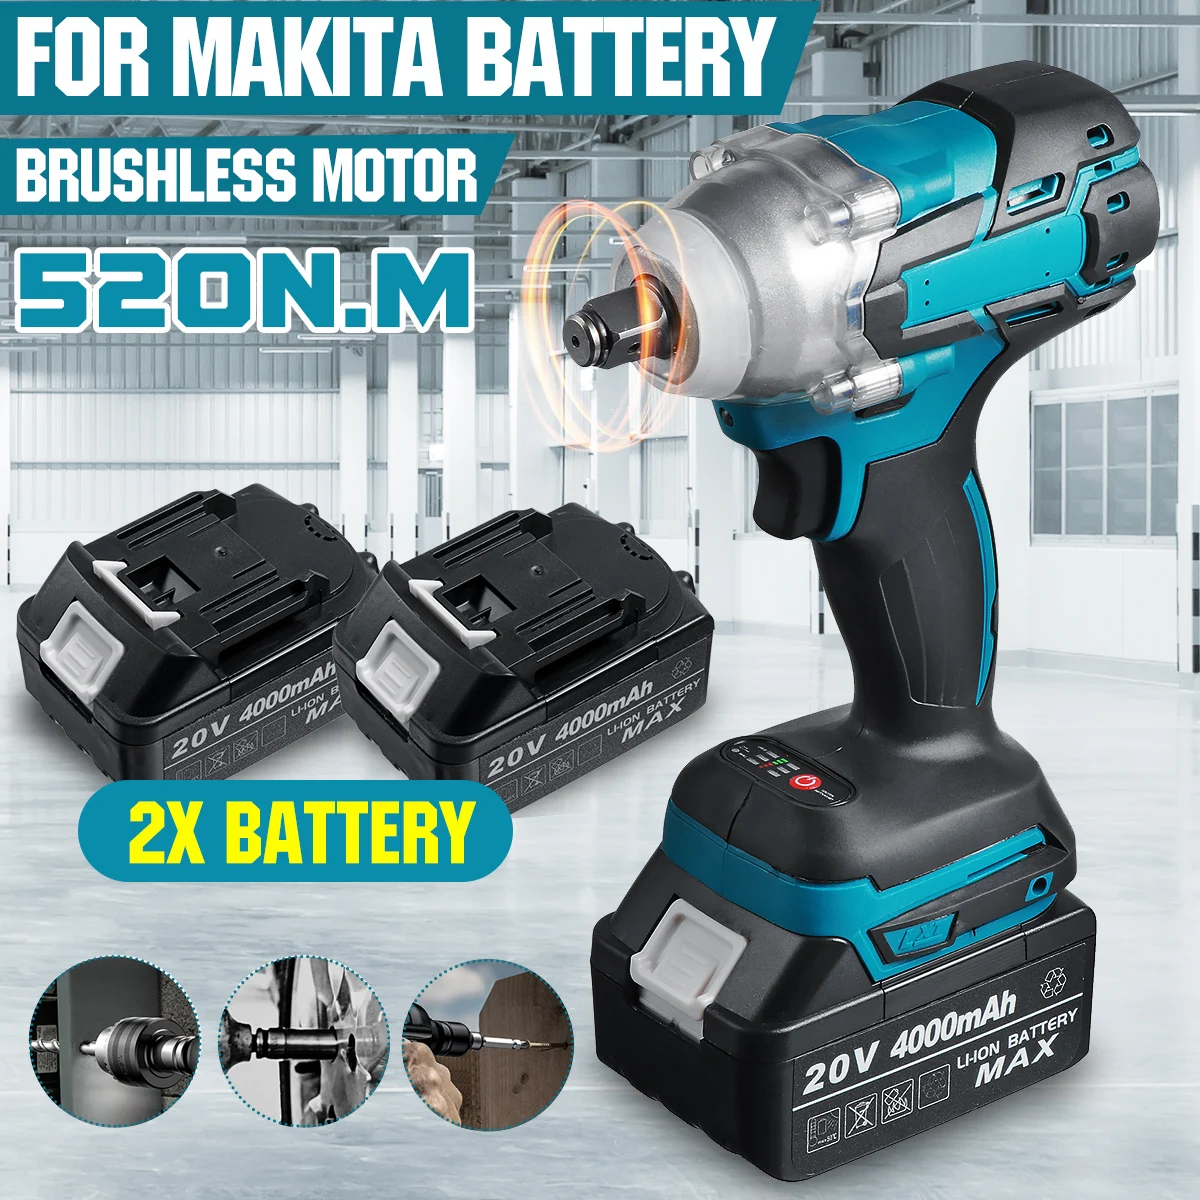 

NEW 520N.M Brushless Electric Impact Wrench Rechargeable 1/2 Socket Cordless Wrench Power Tools 7000rpm for Makita 18V Battery